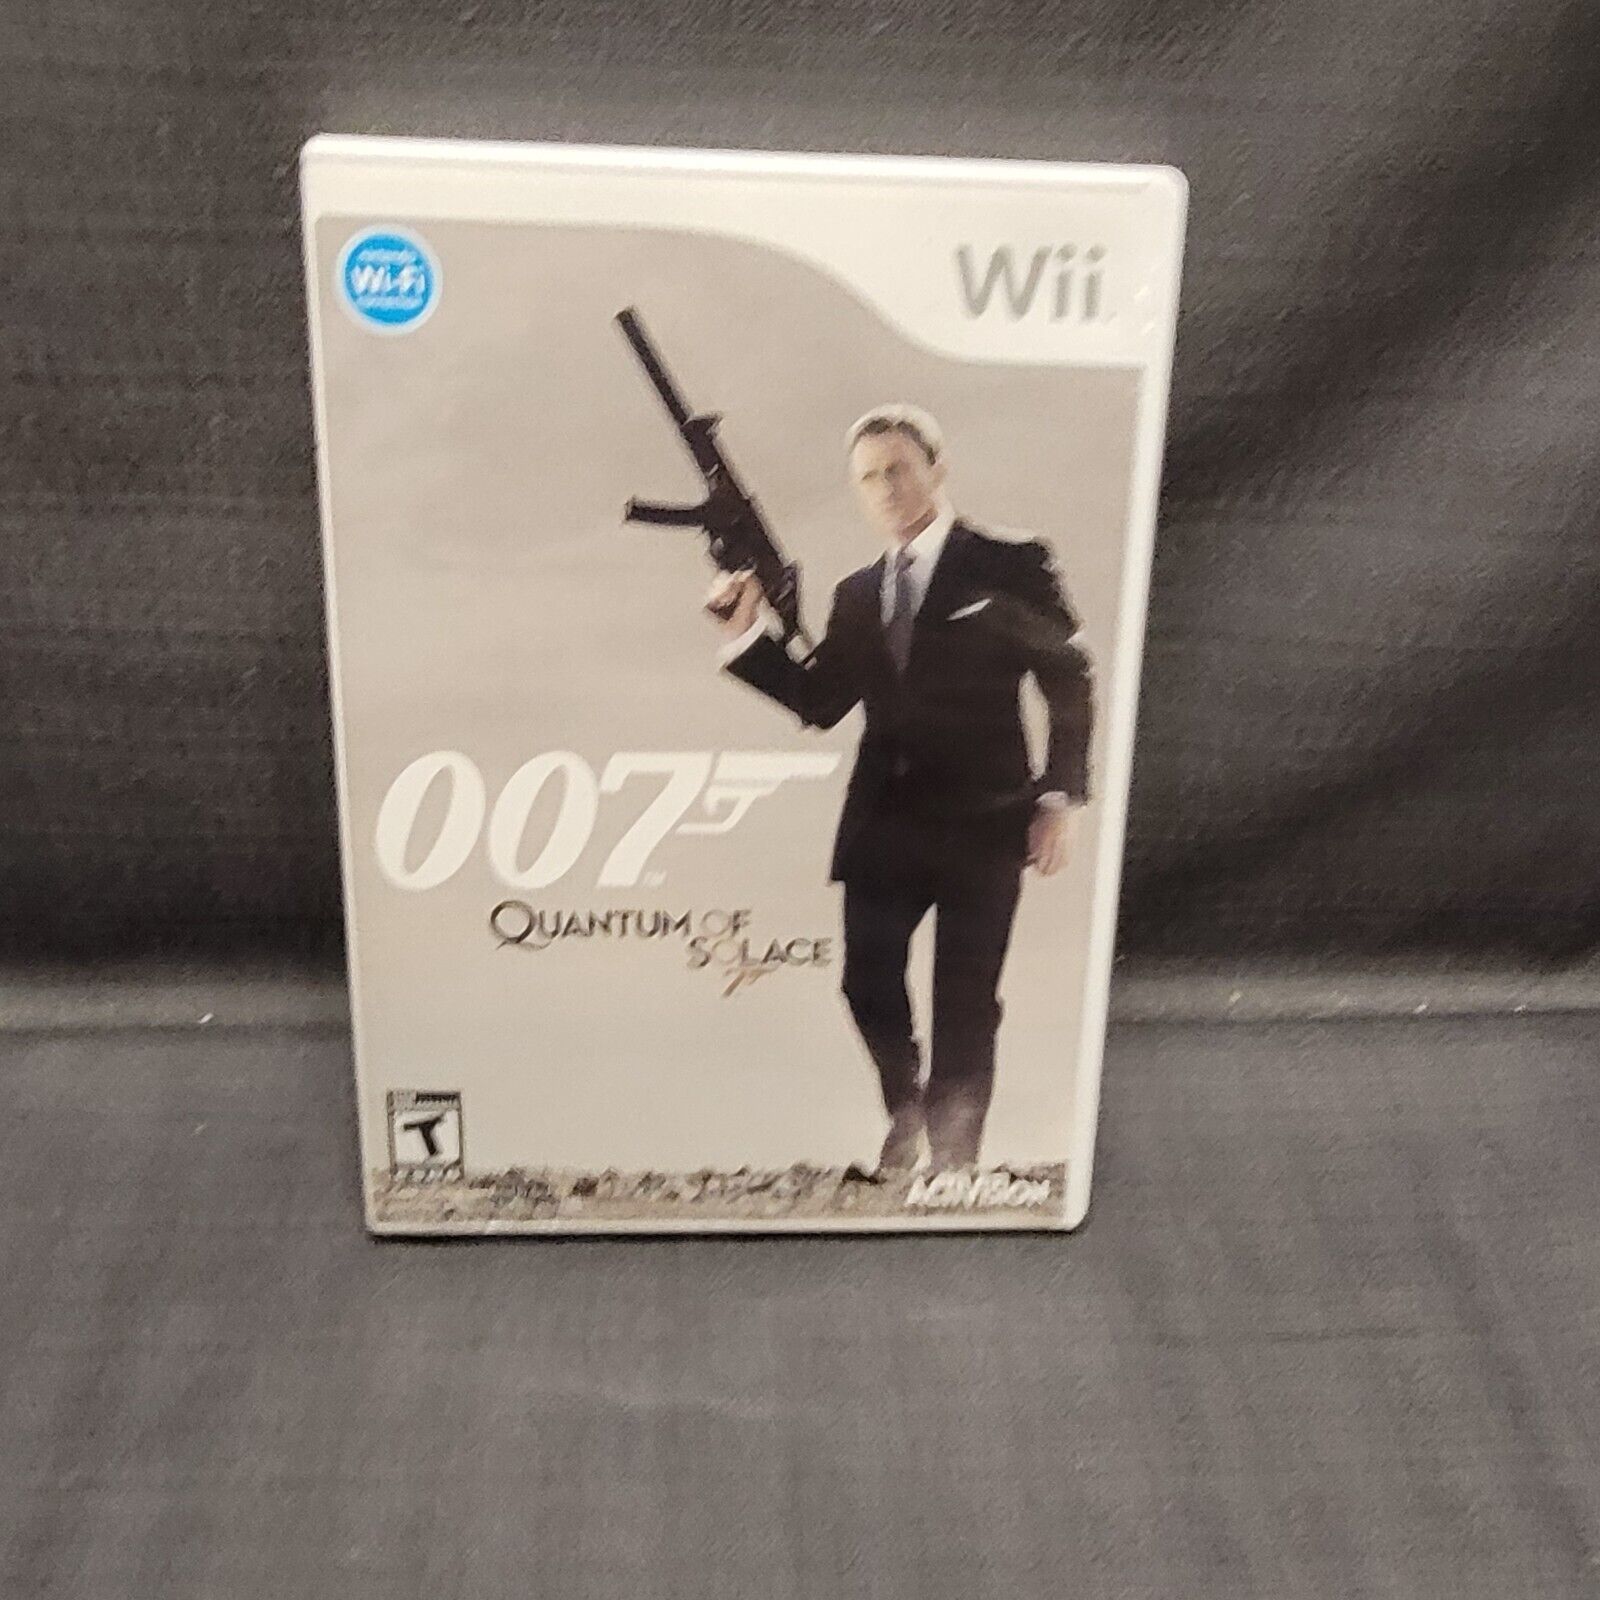 Primary image for James Bond 007: Quantum of Solace (Nintendo Wii, 2008) Video Game